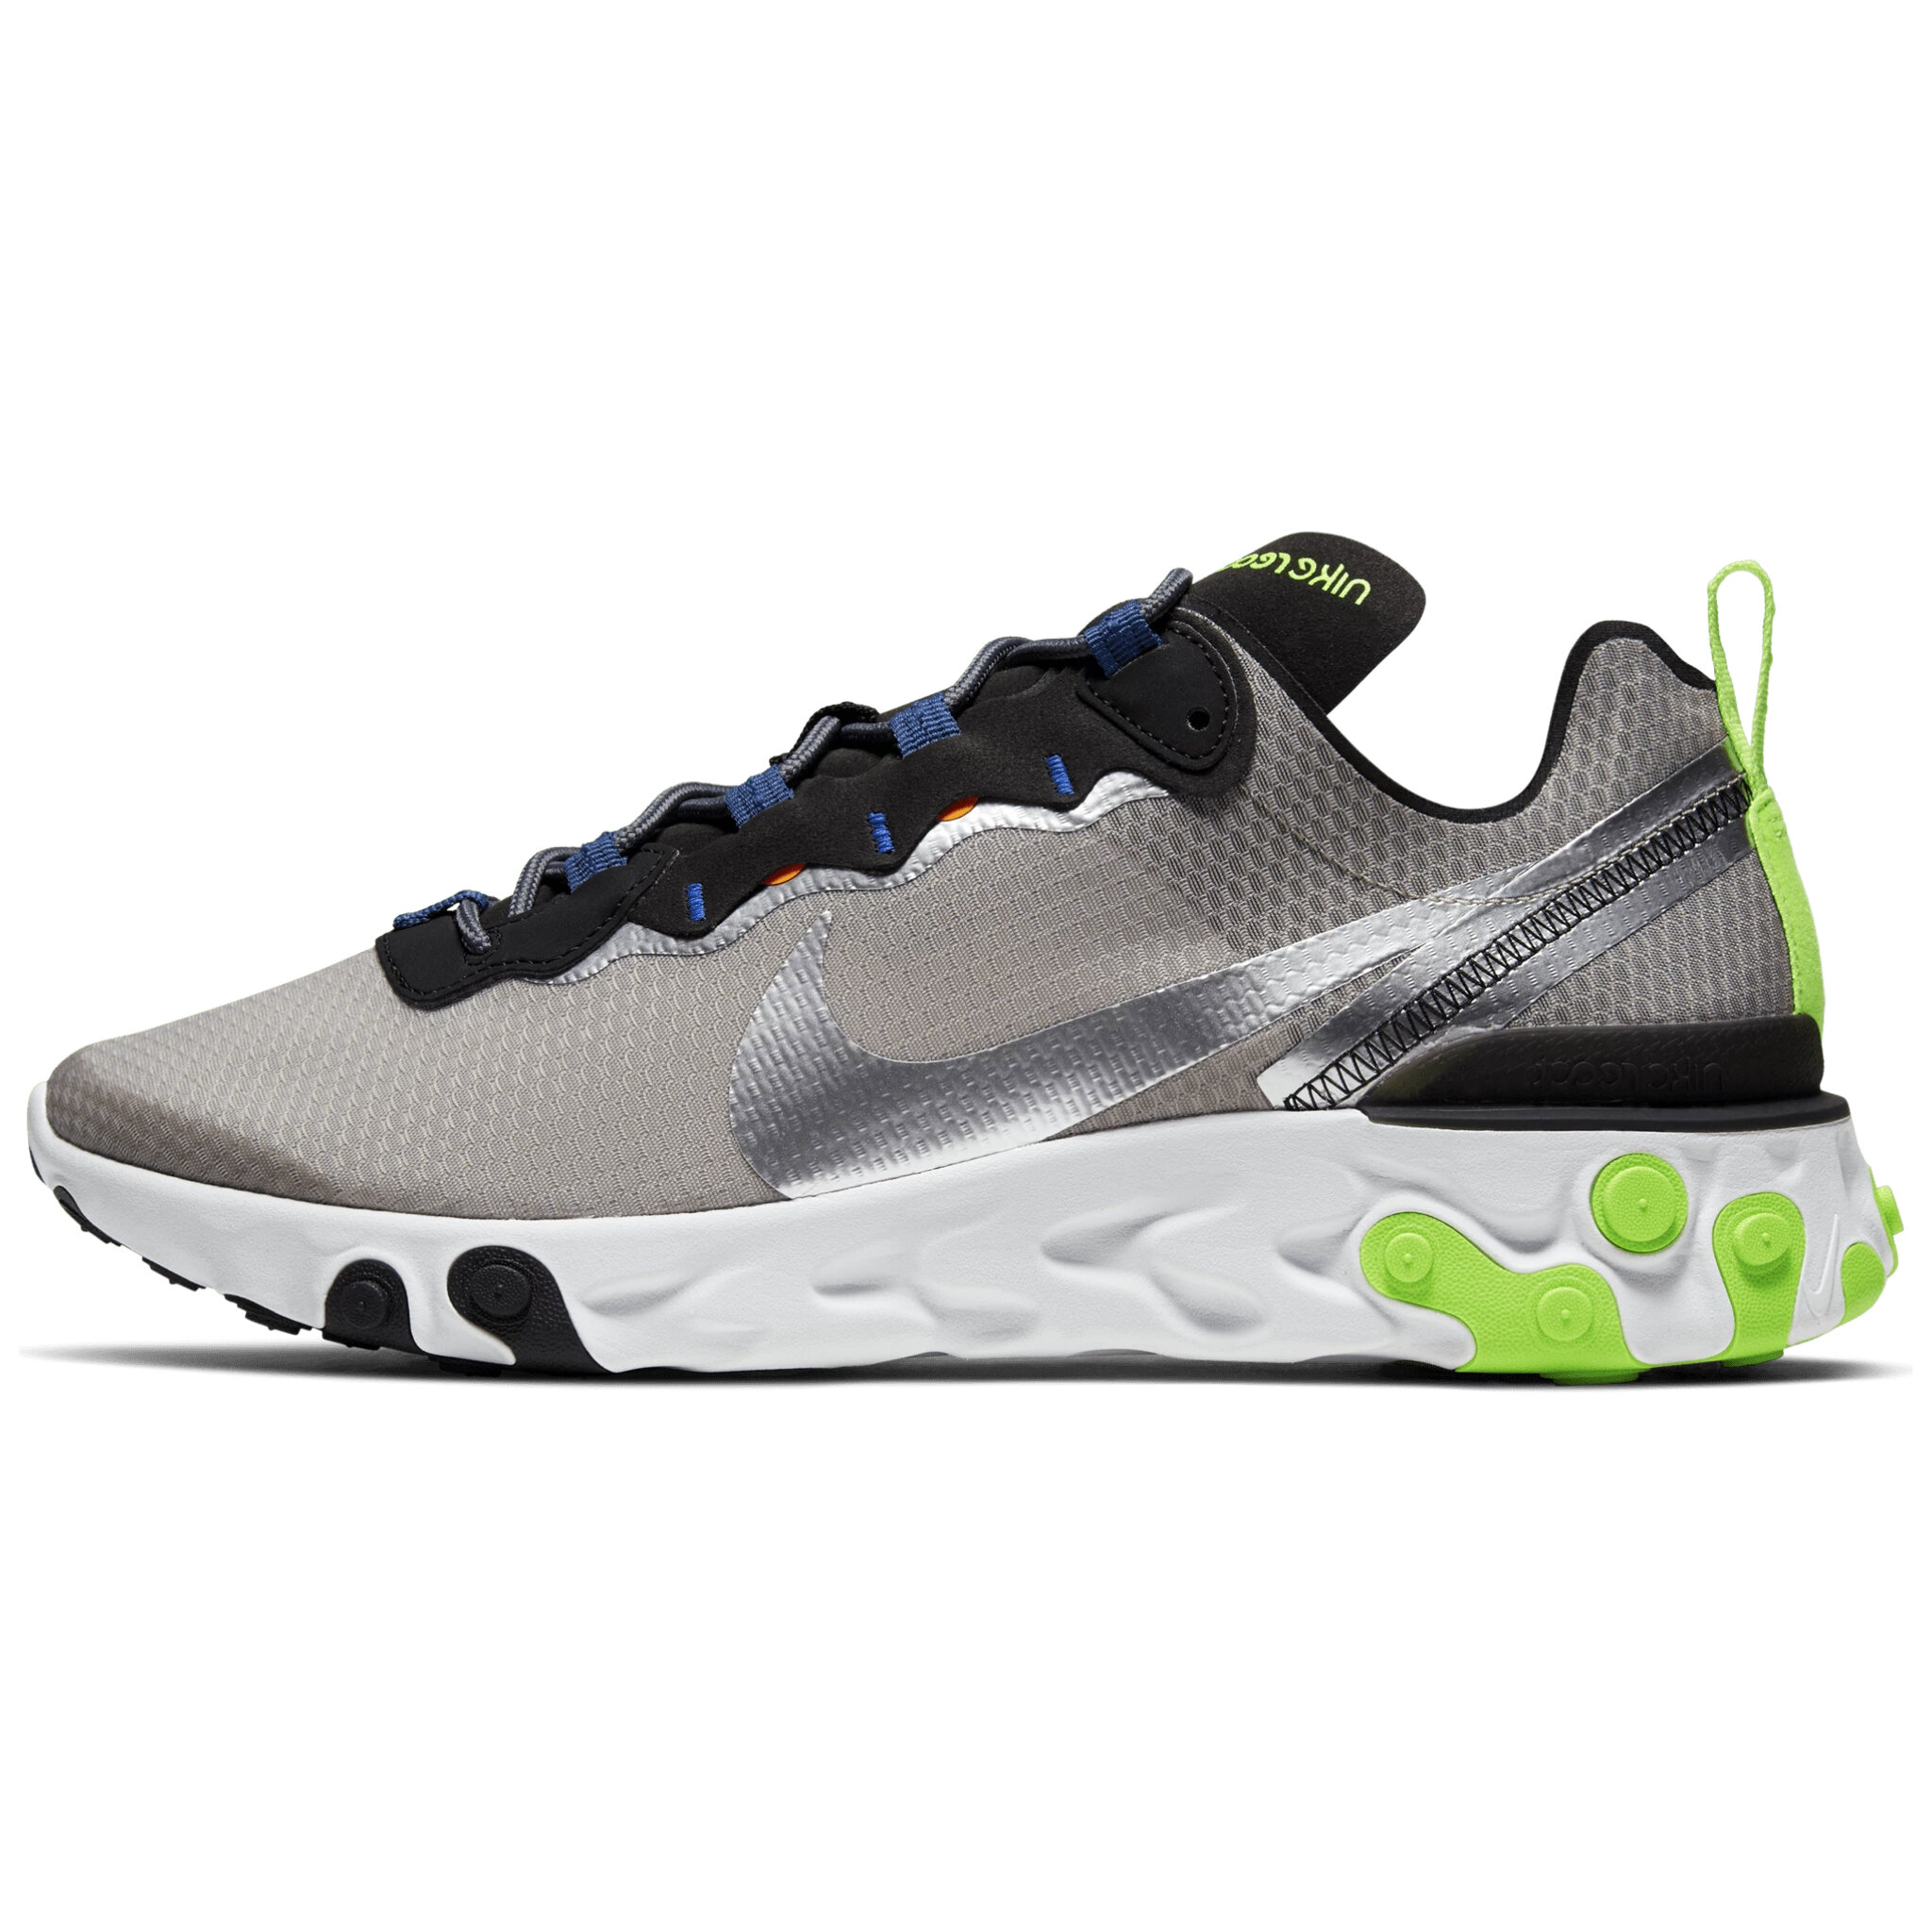 nike react element 55 grey and green